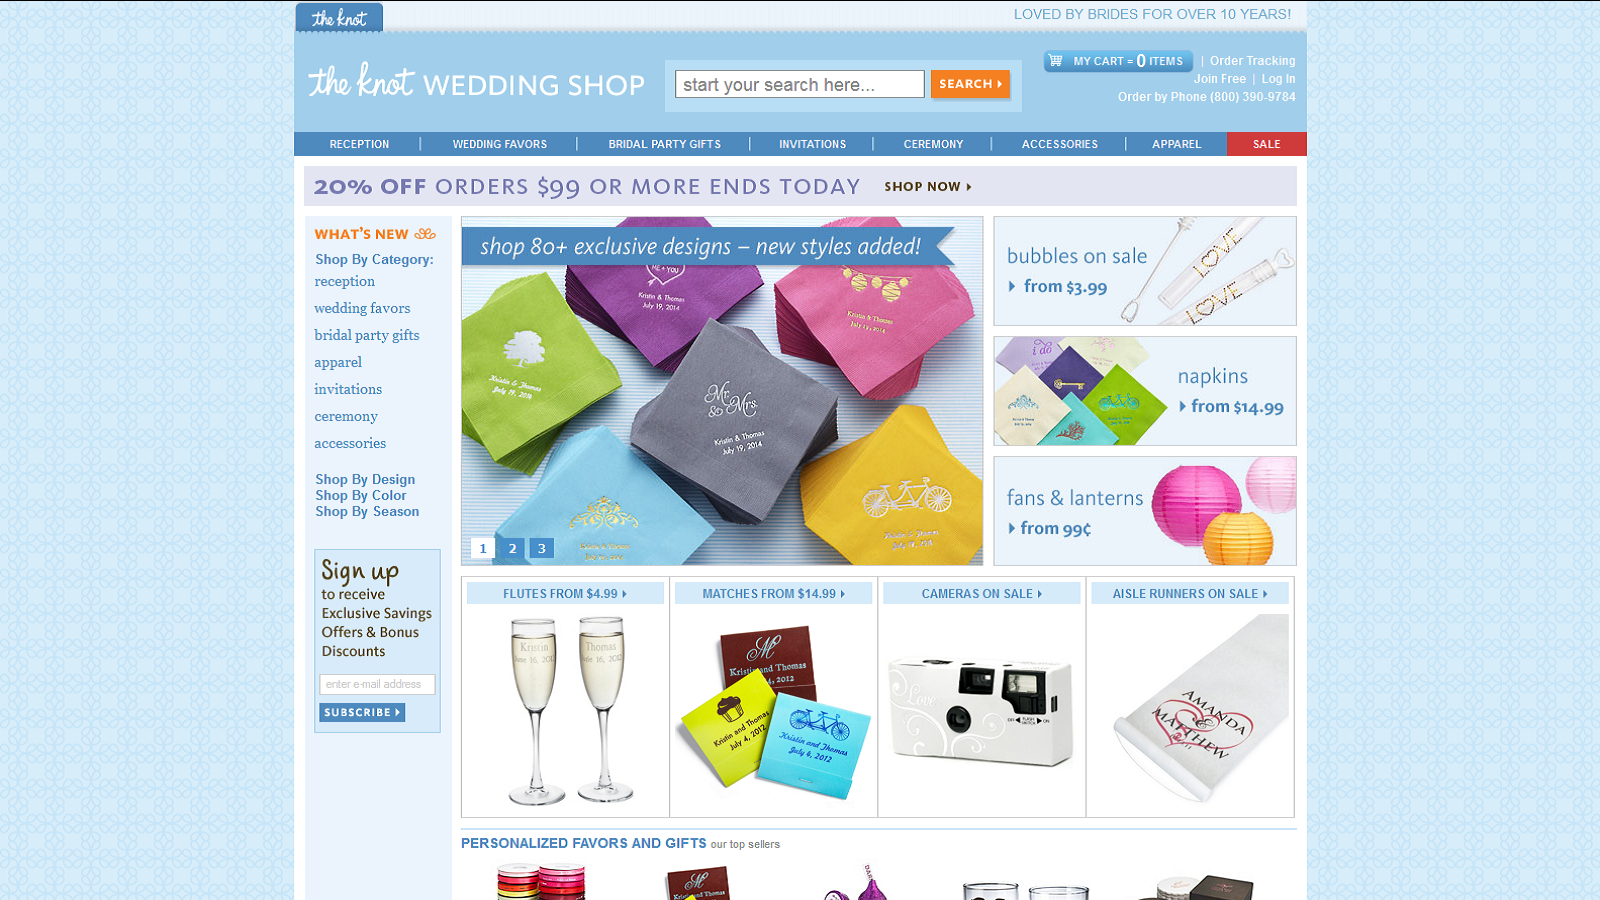 The Knot Wedding Shop Coupons & Promo Codes!